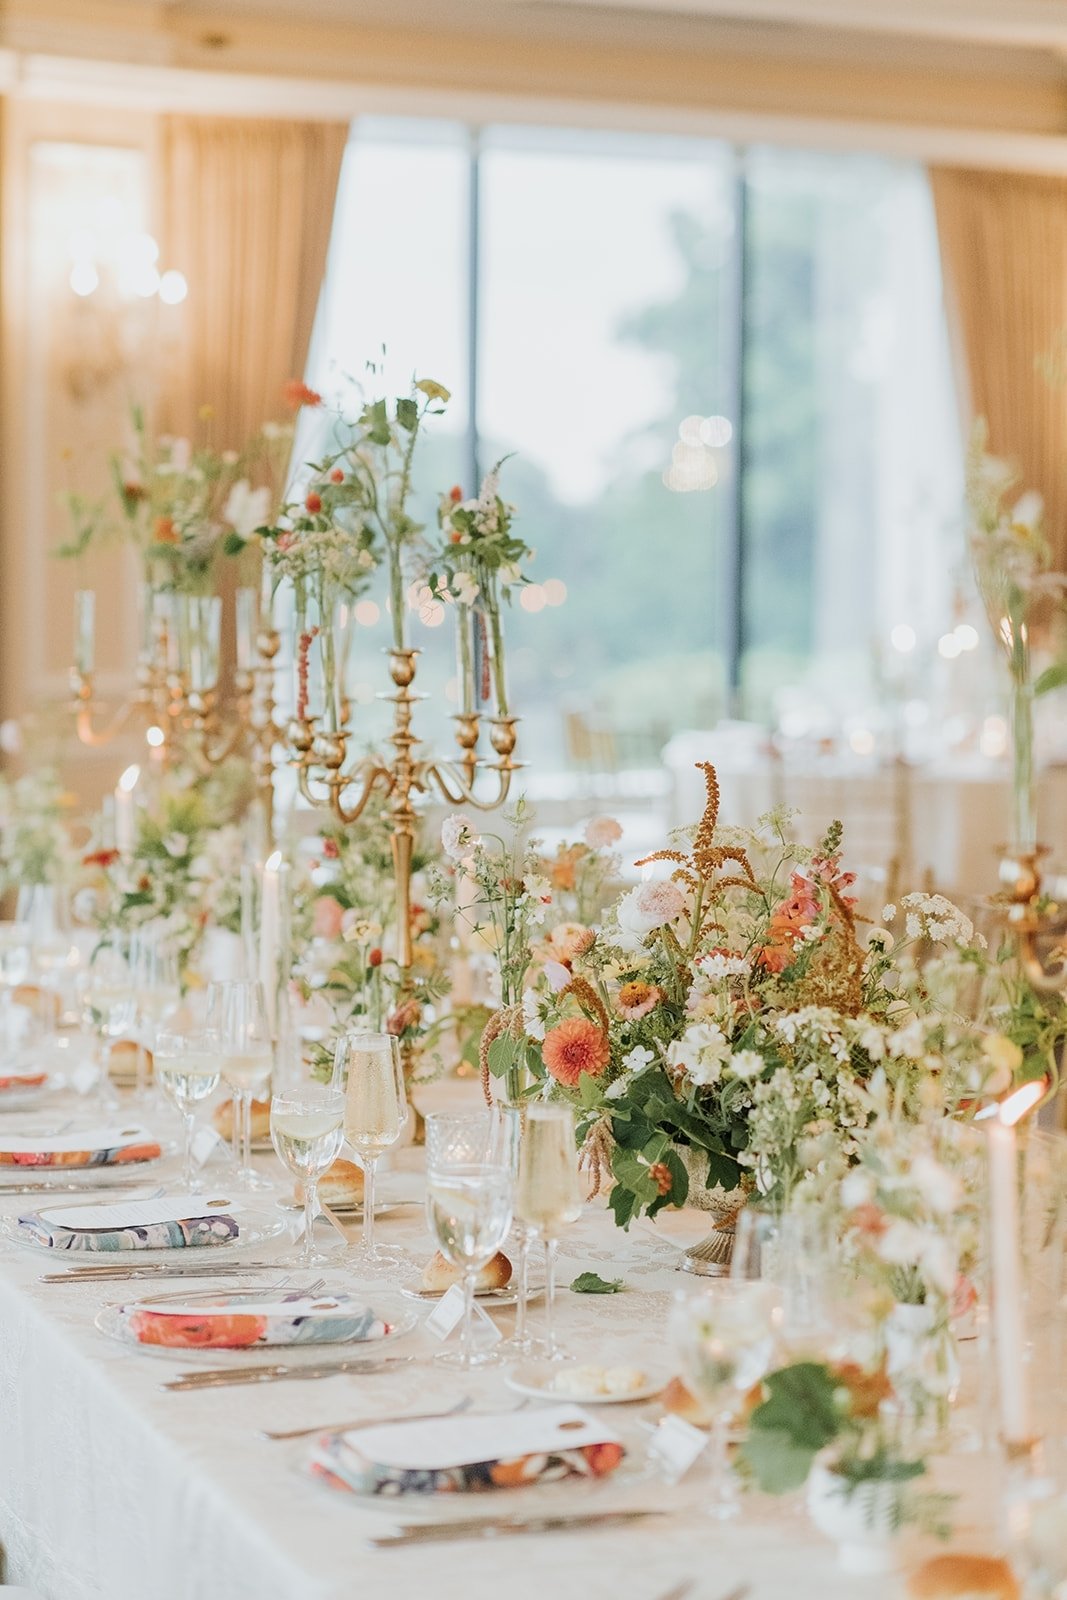 Unique and one of kind = Esme &amp; Mike's Oheka Castle Wedding. Hometown Flower Co. brought the garden INSIDE and we can't stop thinking about it. Right?!

Ceremony &amp; Reception Venue: @ohekacastle
Planning: @urbanallureevents
Photo: @eileenmenyp